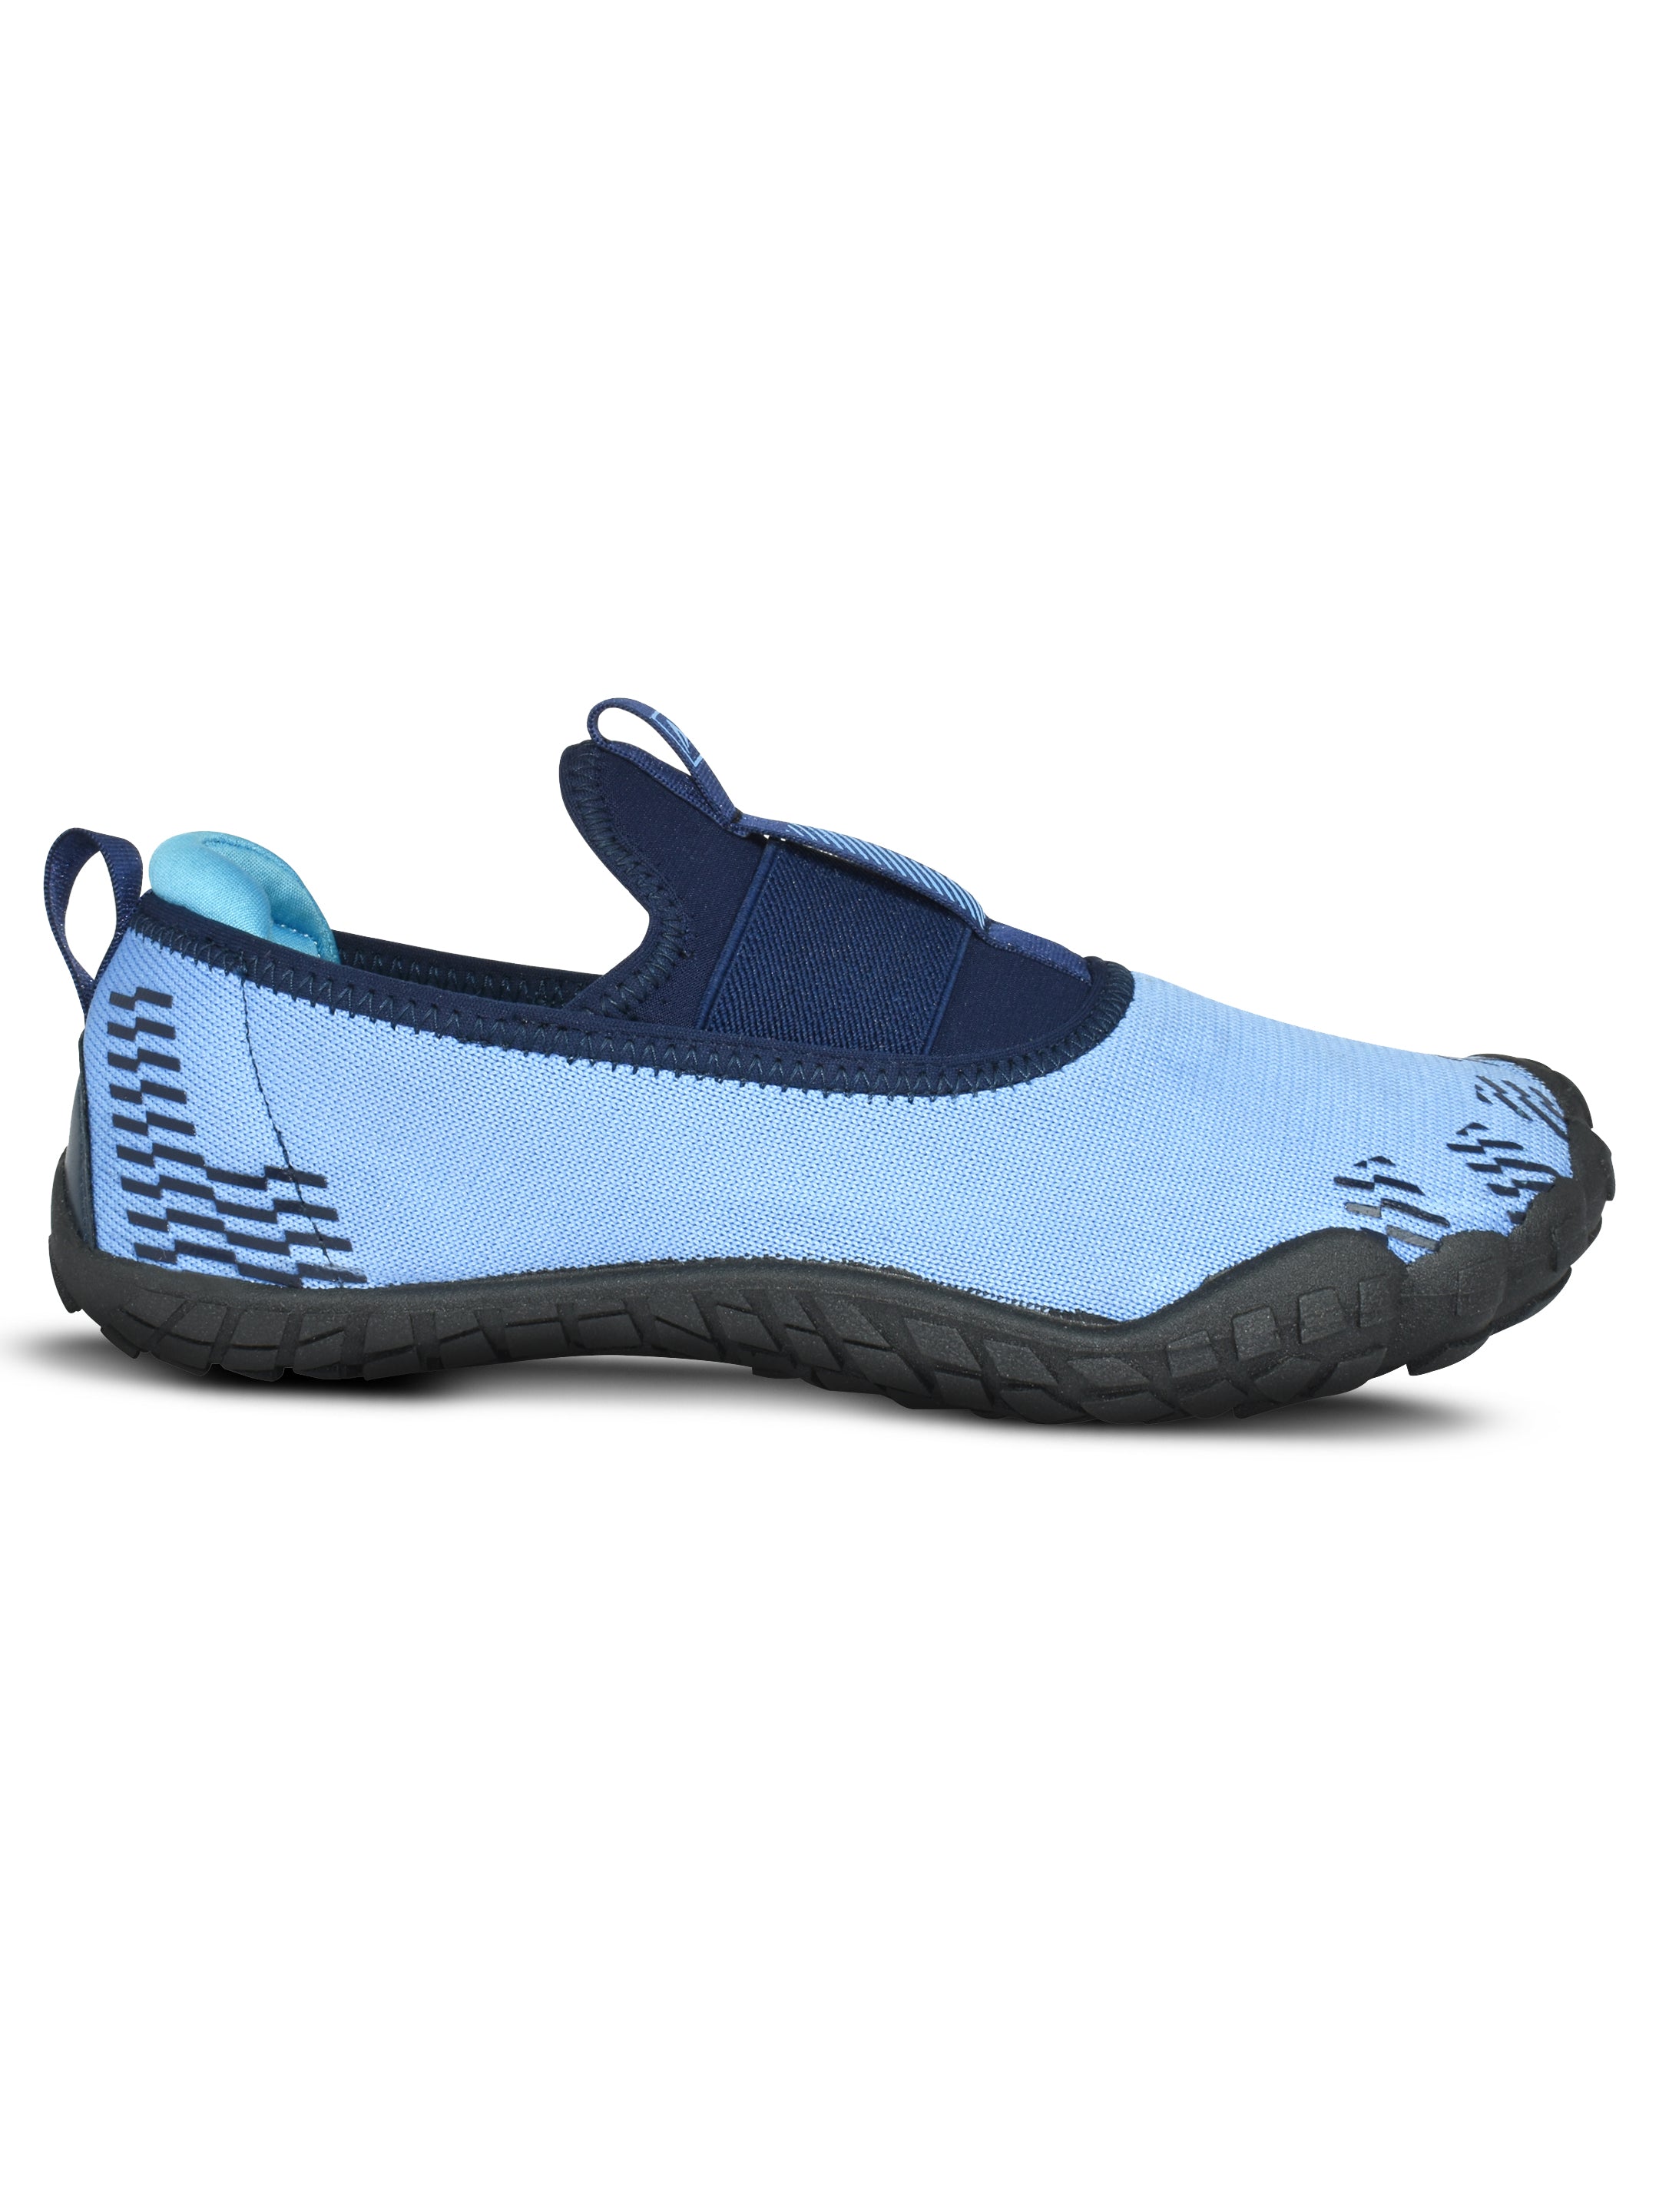 Impakto Barefoot Rooted Men's Teal Blue Gym Shoes